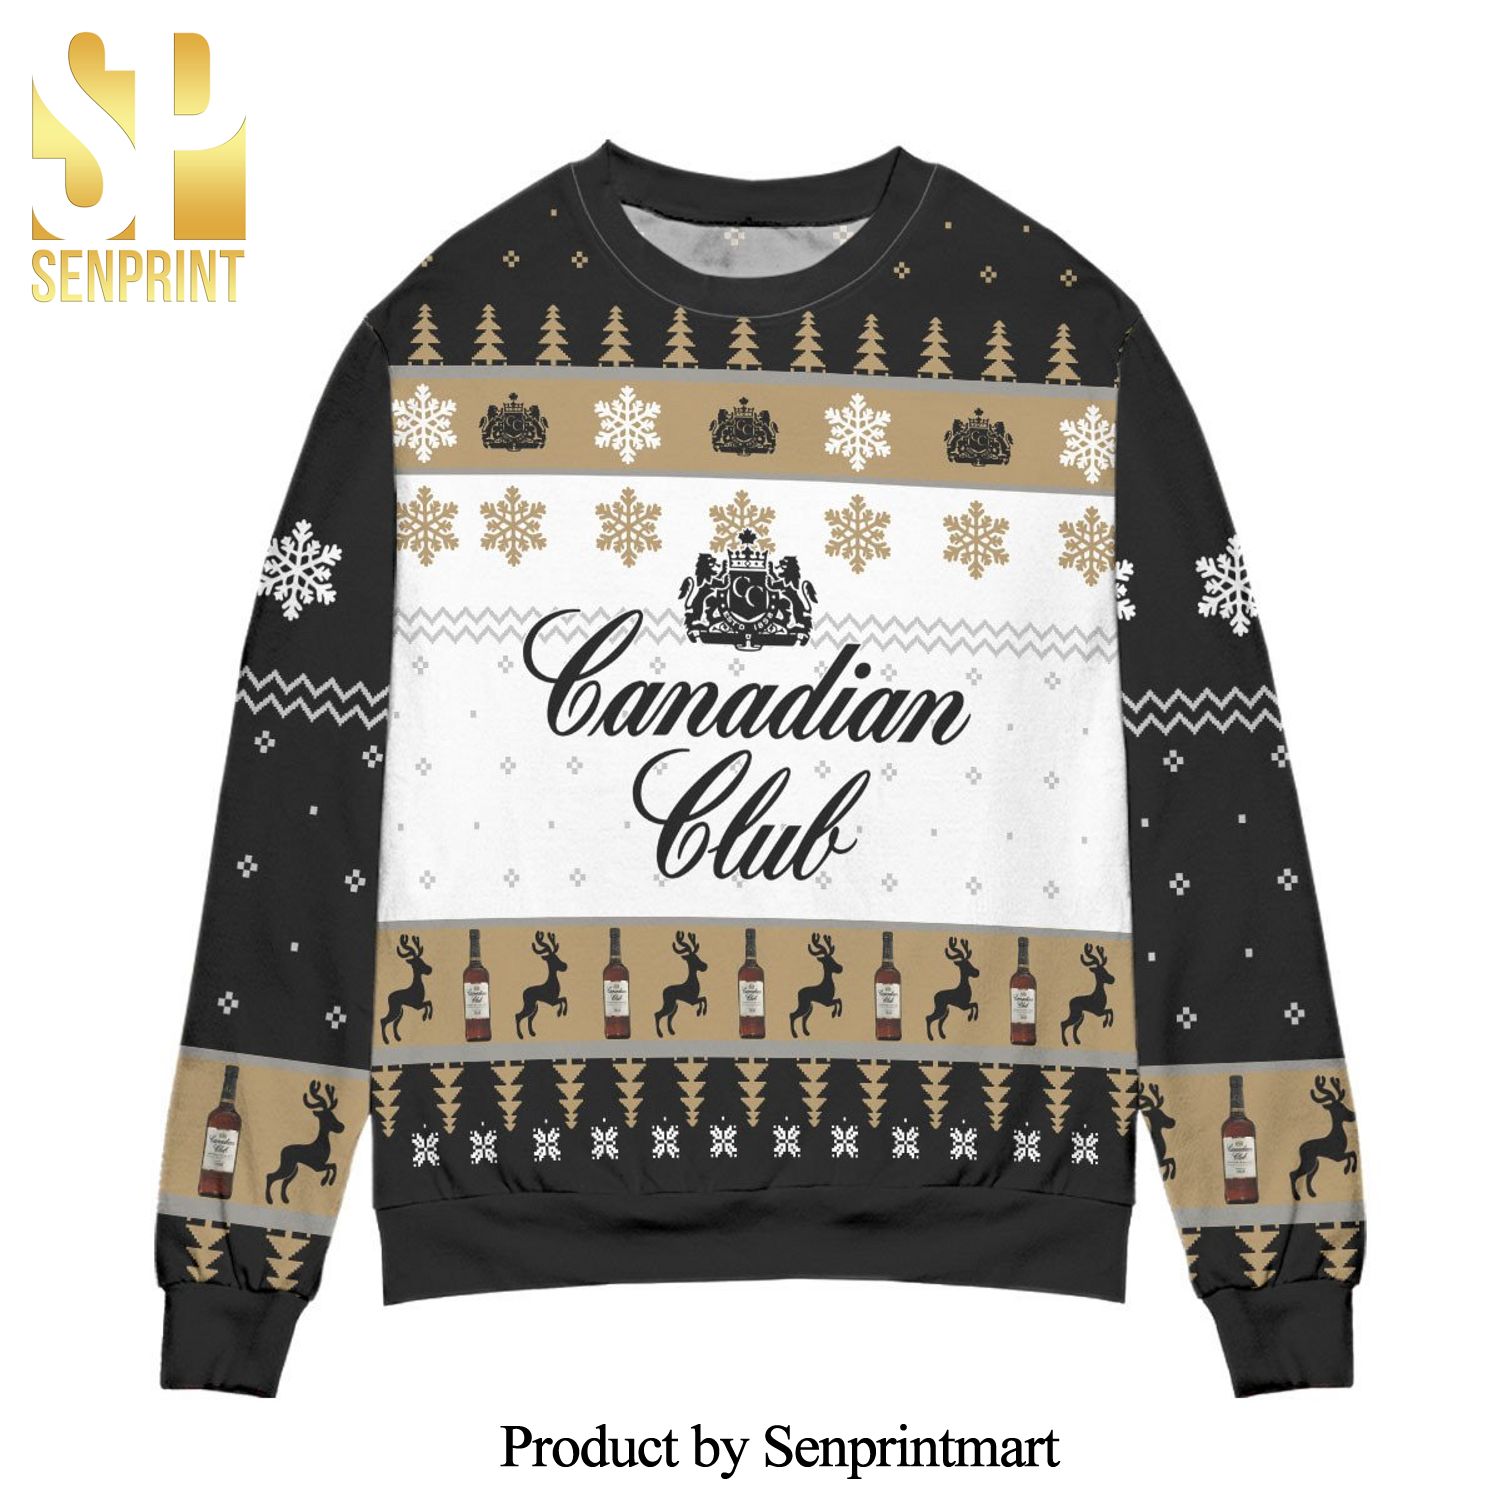 Canadian Club Whisky Snowflake Pattern Knitted Ugly Christmas Sweater – Black